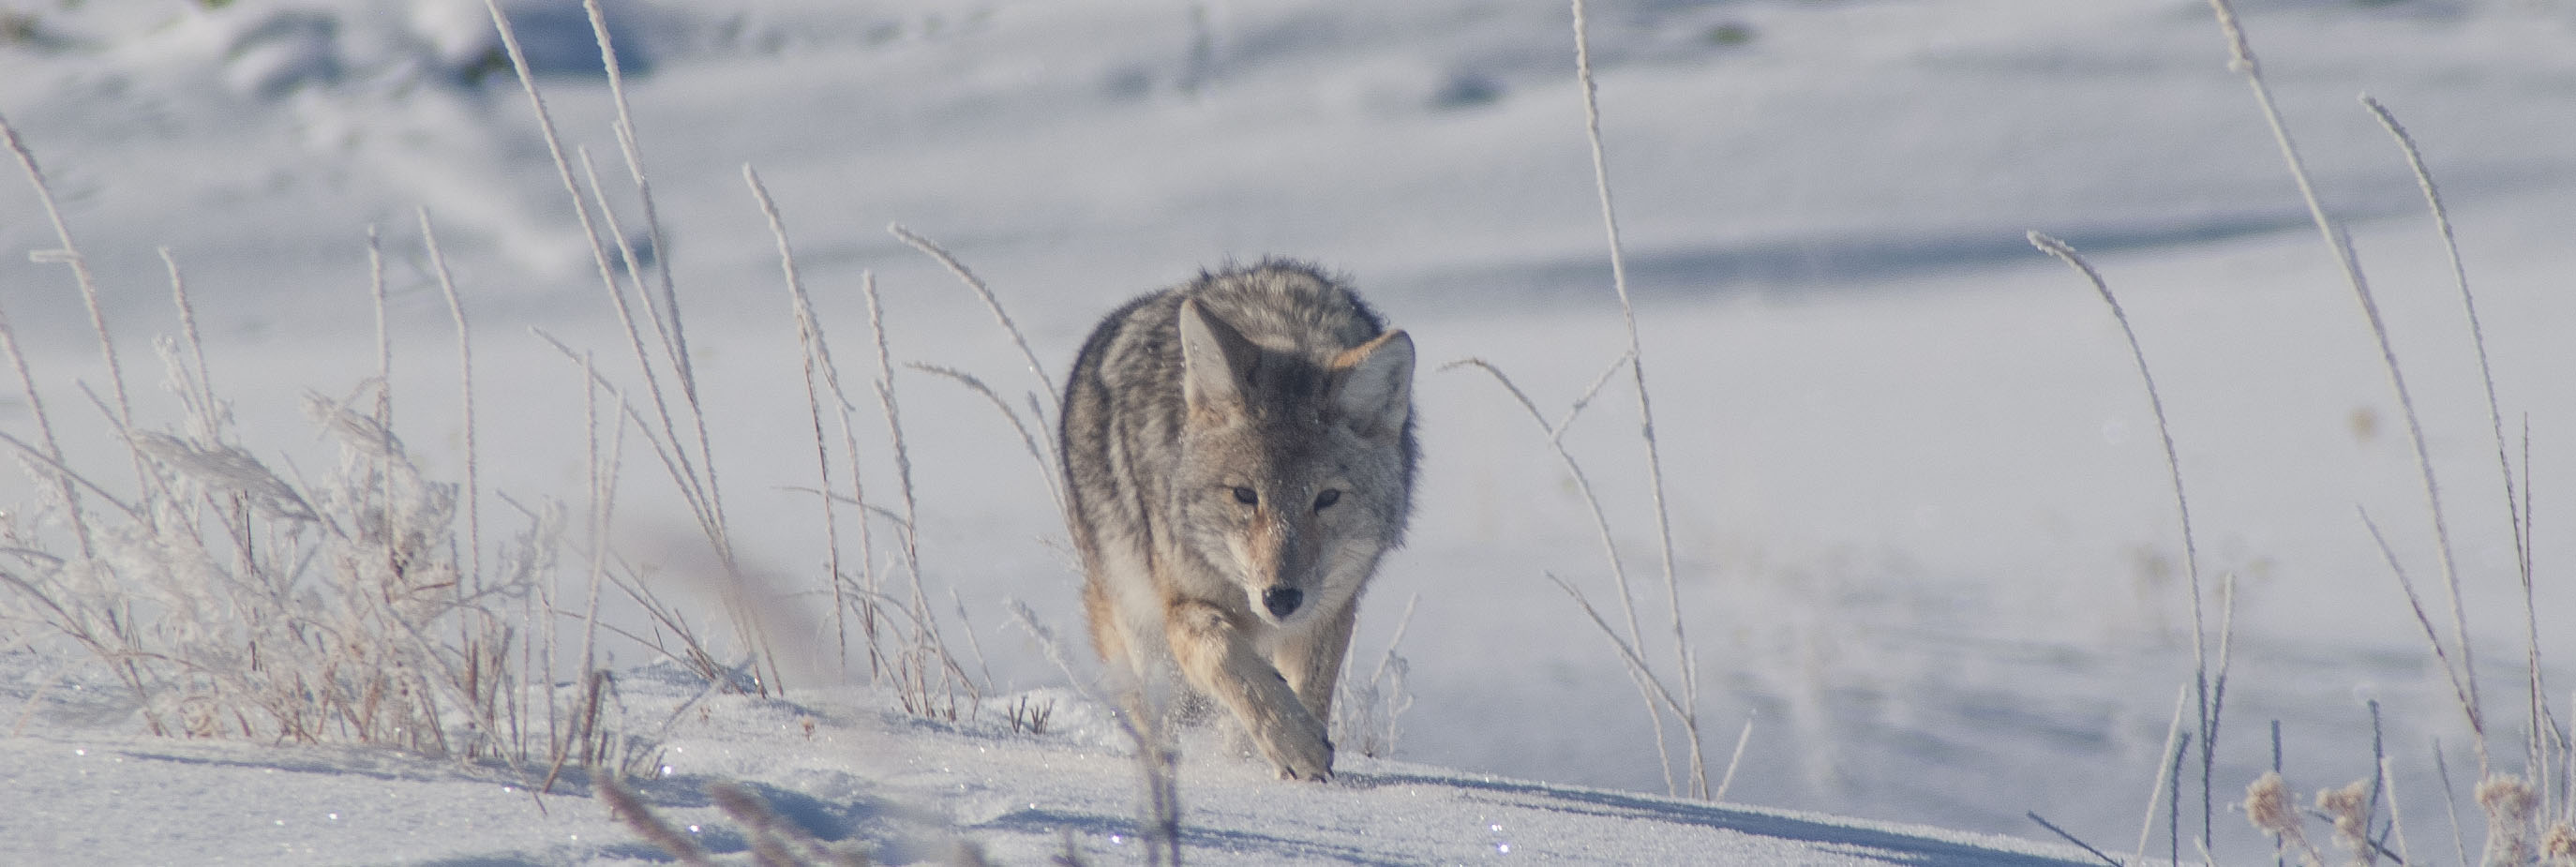 A coyote in Yellowstone National Park.